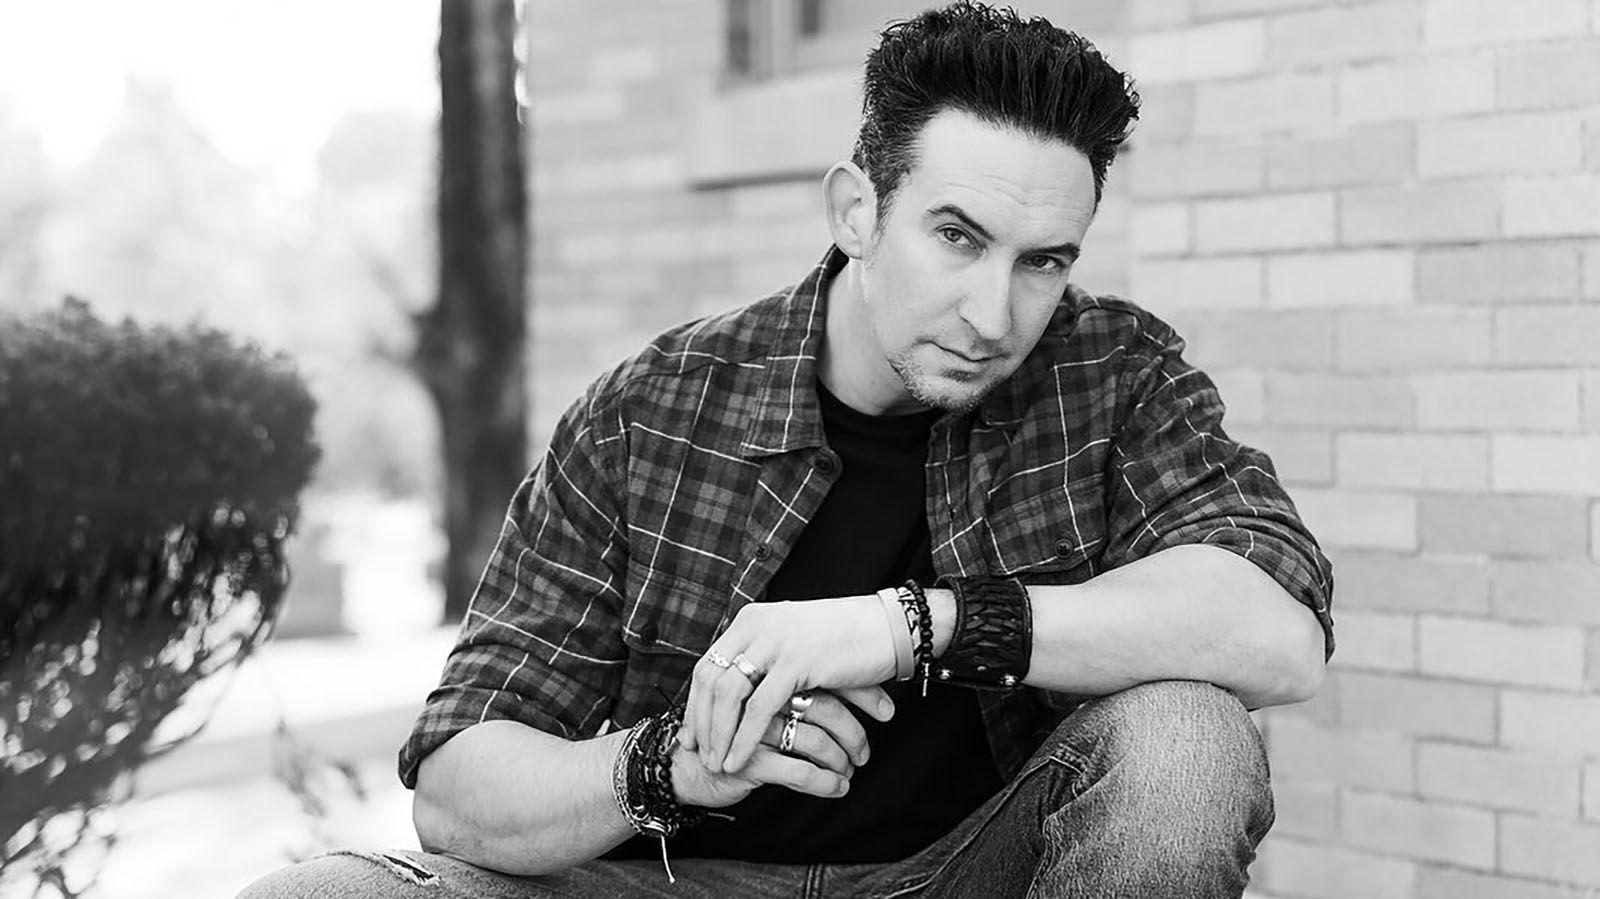 Dustin Pari will present "Ghosts: Do You Believe?" on Friday, April 12, at The Clyde Theatre.